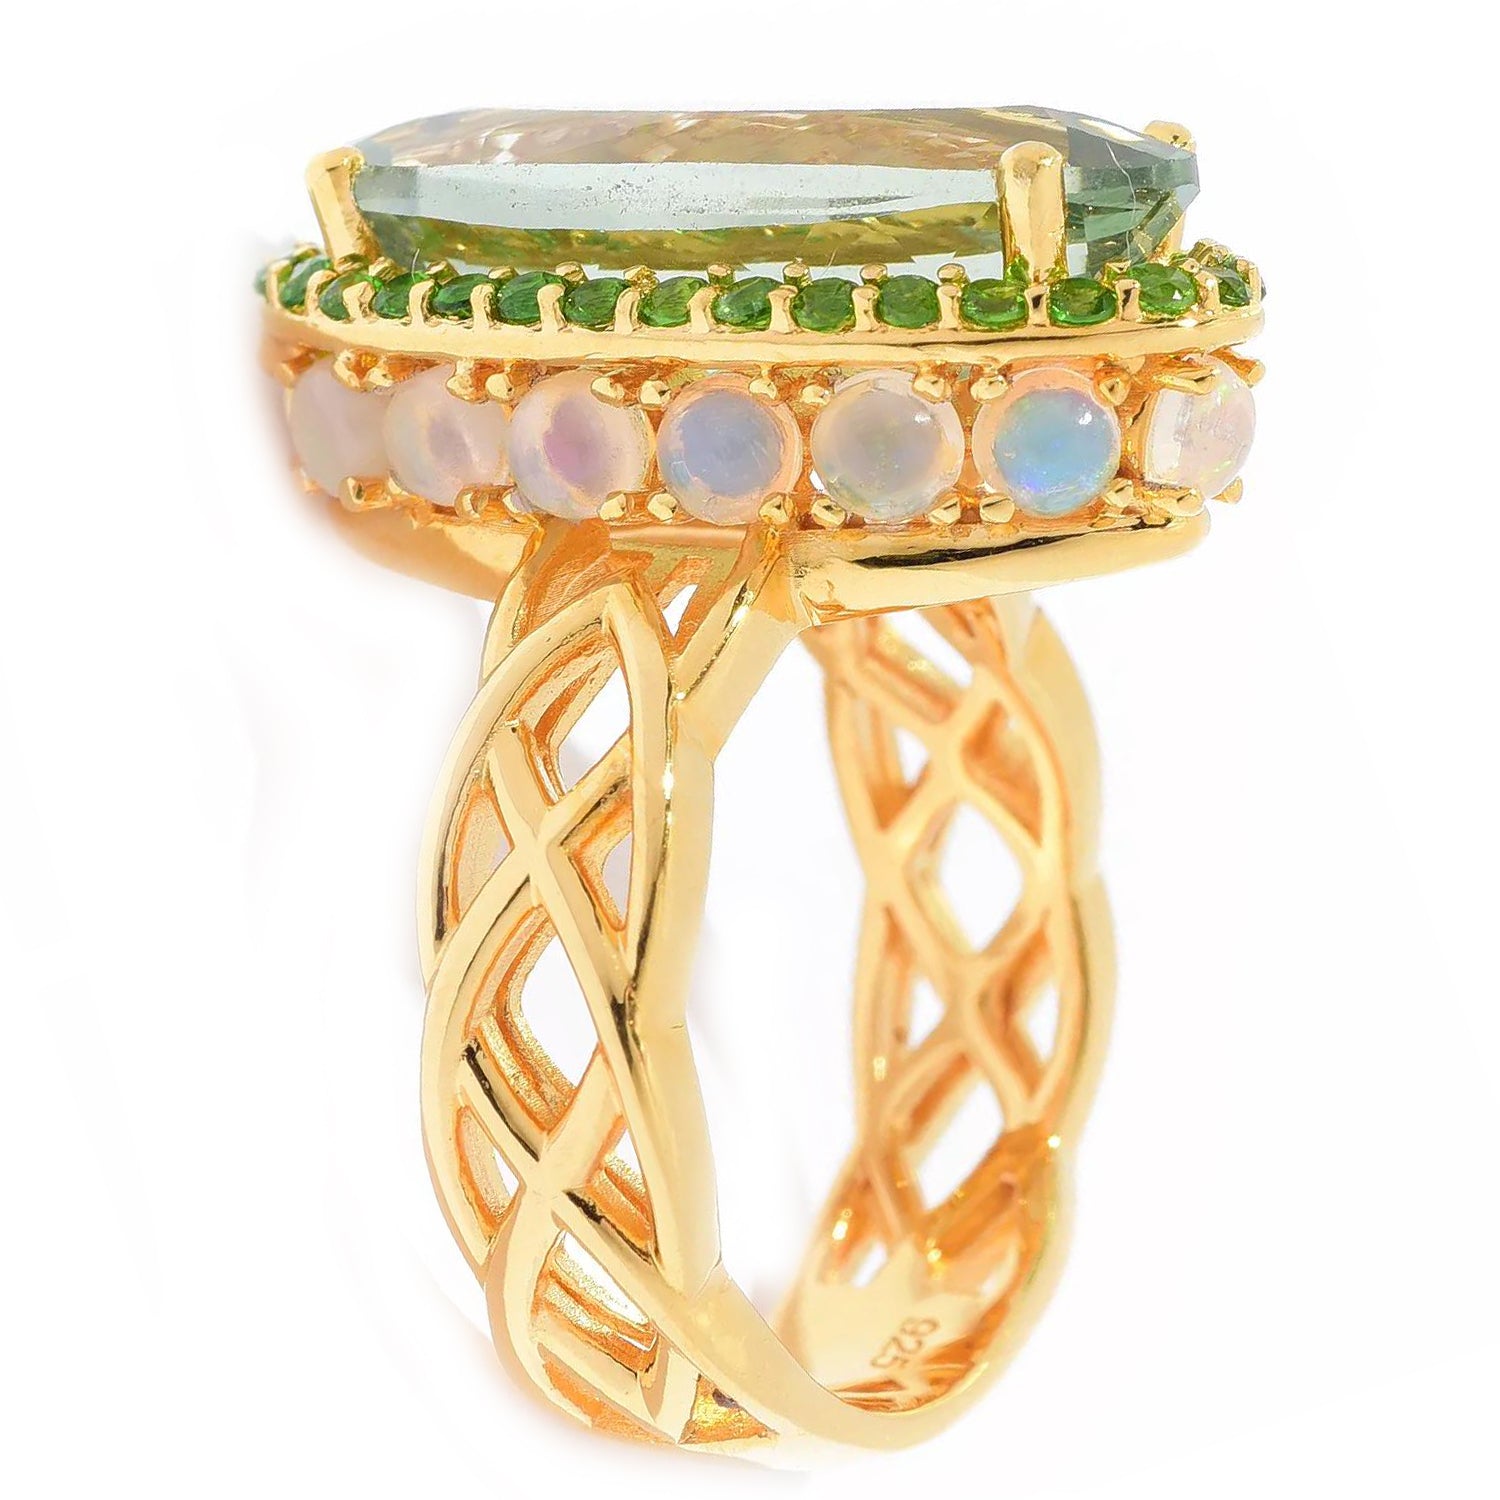 Hall of Jewels 8.81ctw Prasiolite, Chrome Diopside & Ethiopian Opal Woven Shank Ring